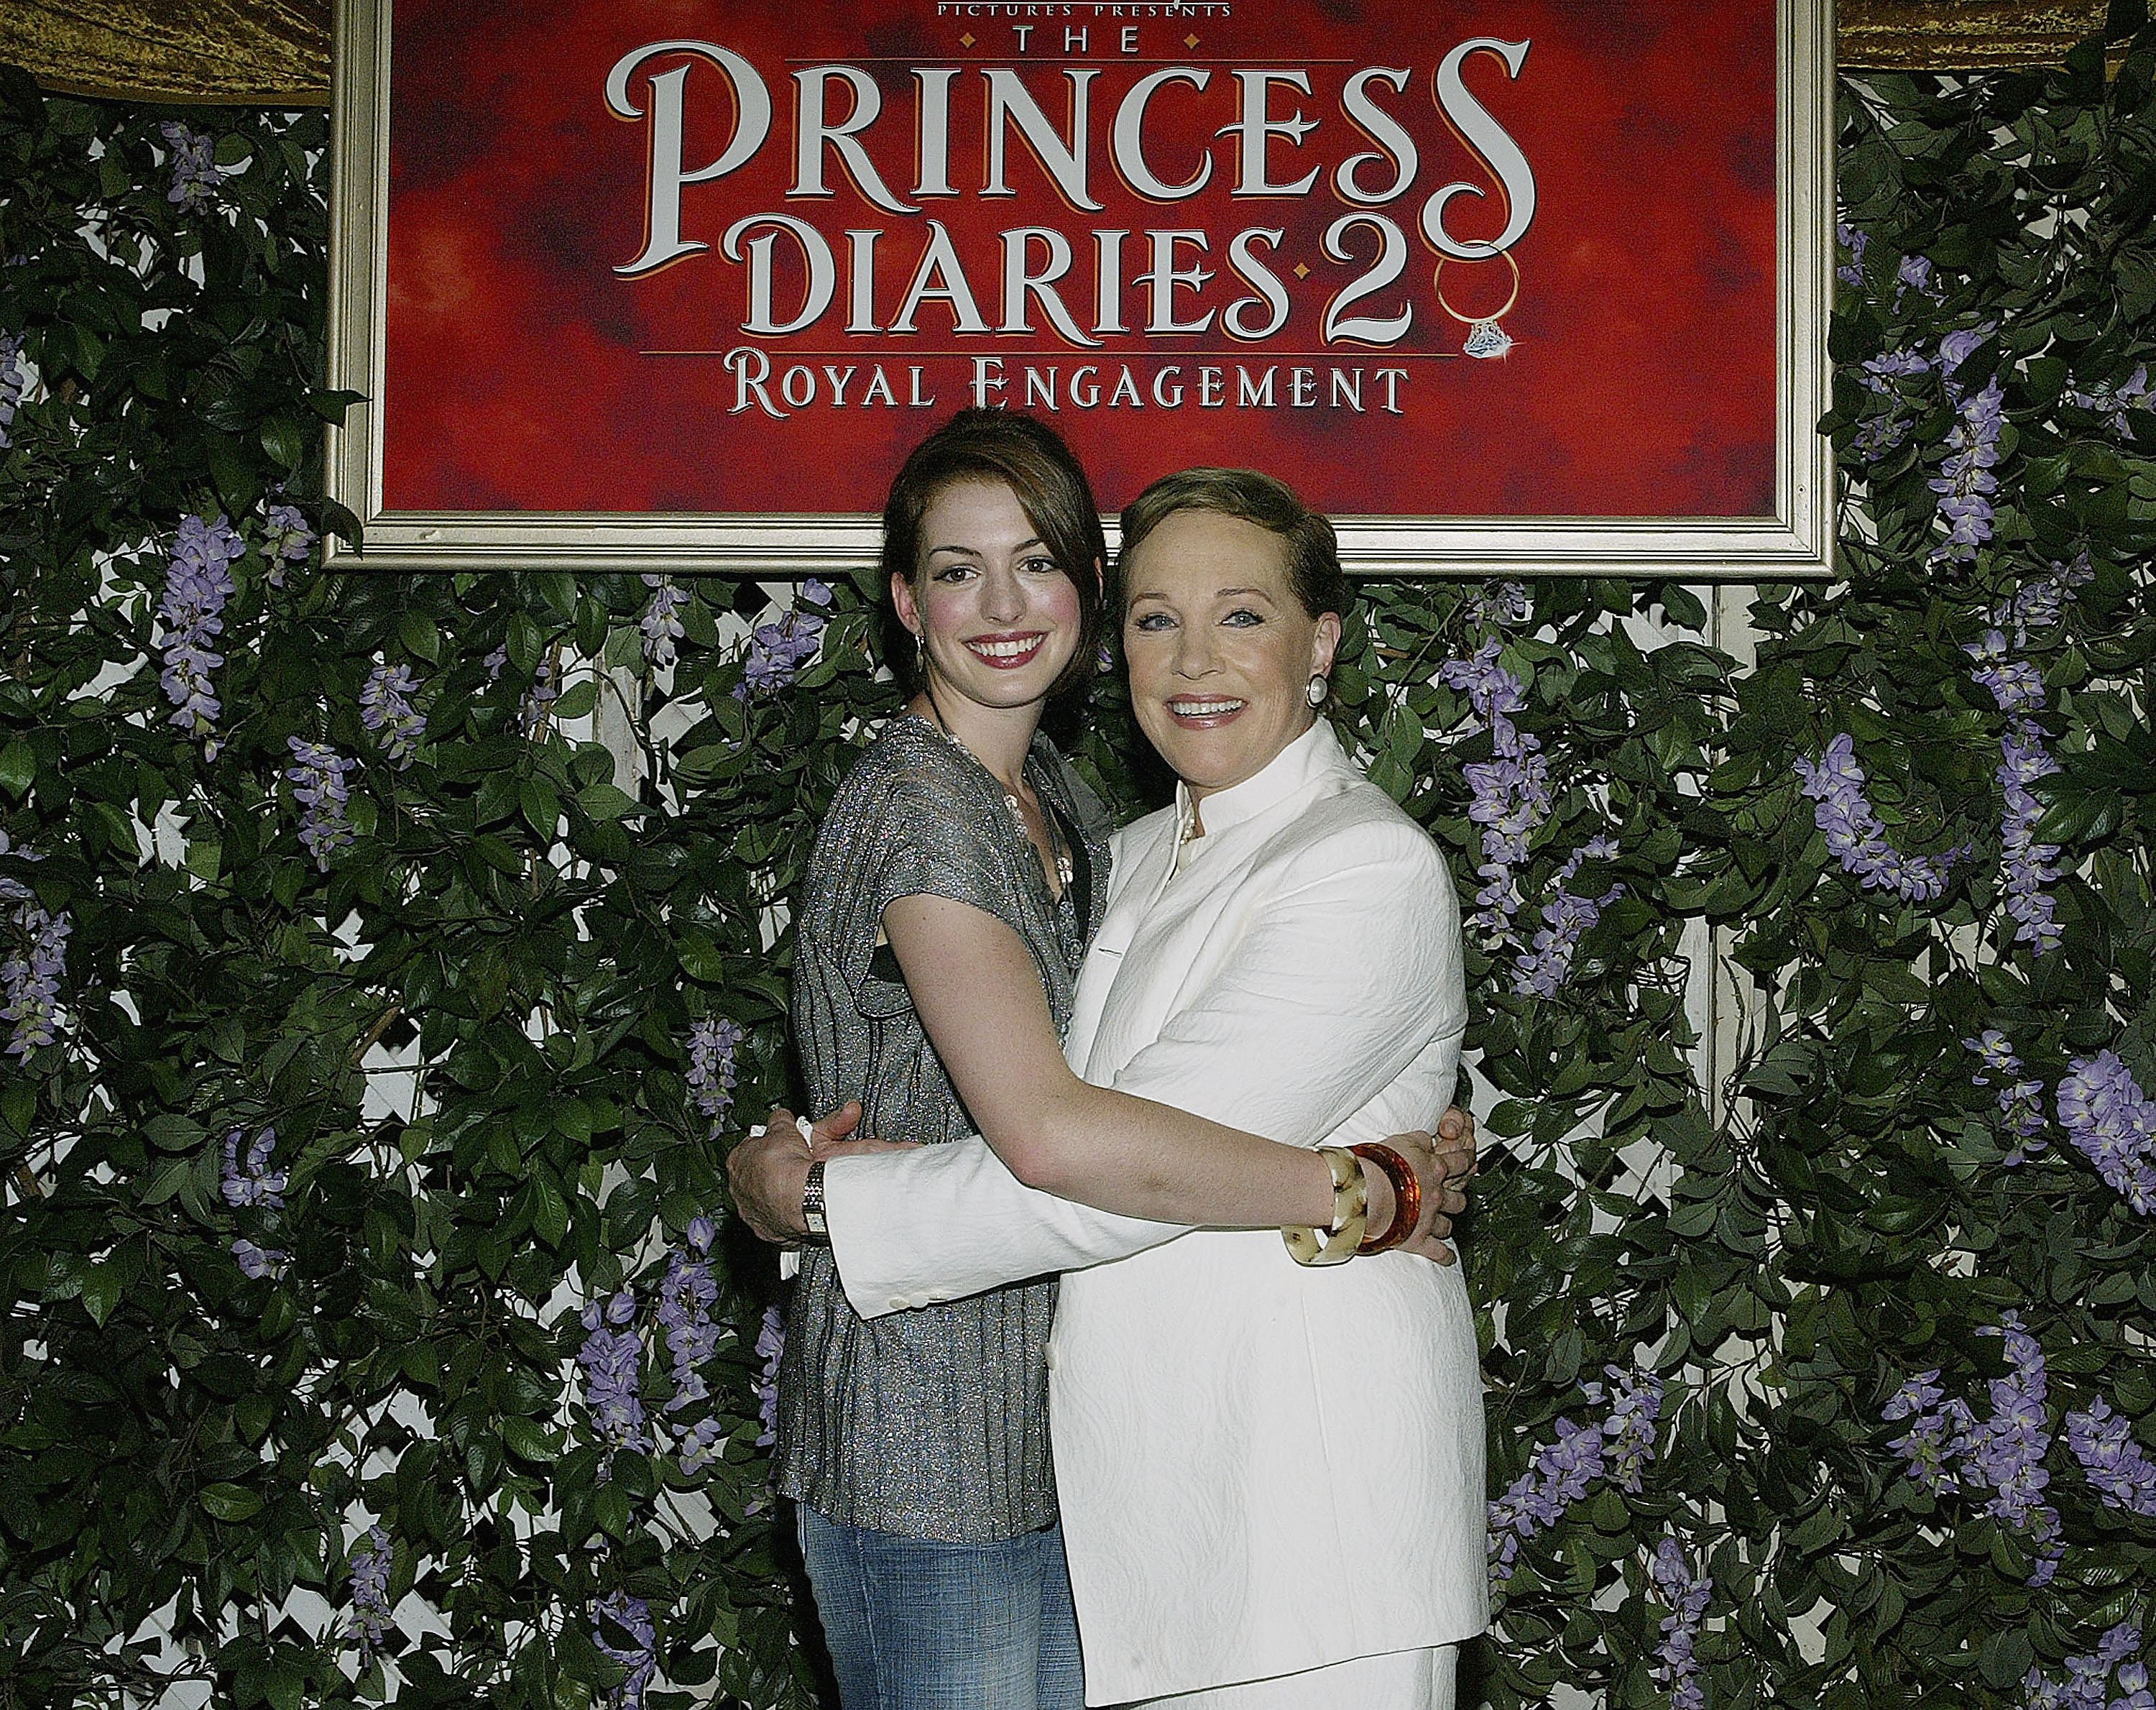 Julie Andrews Says She’s ‘Probably Not’ Going to Star in ‘Princess Diaries 3’